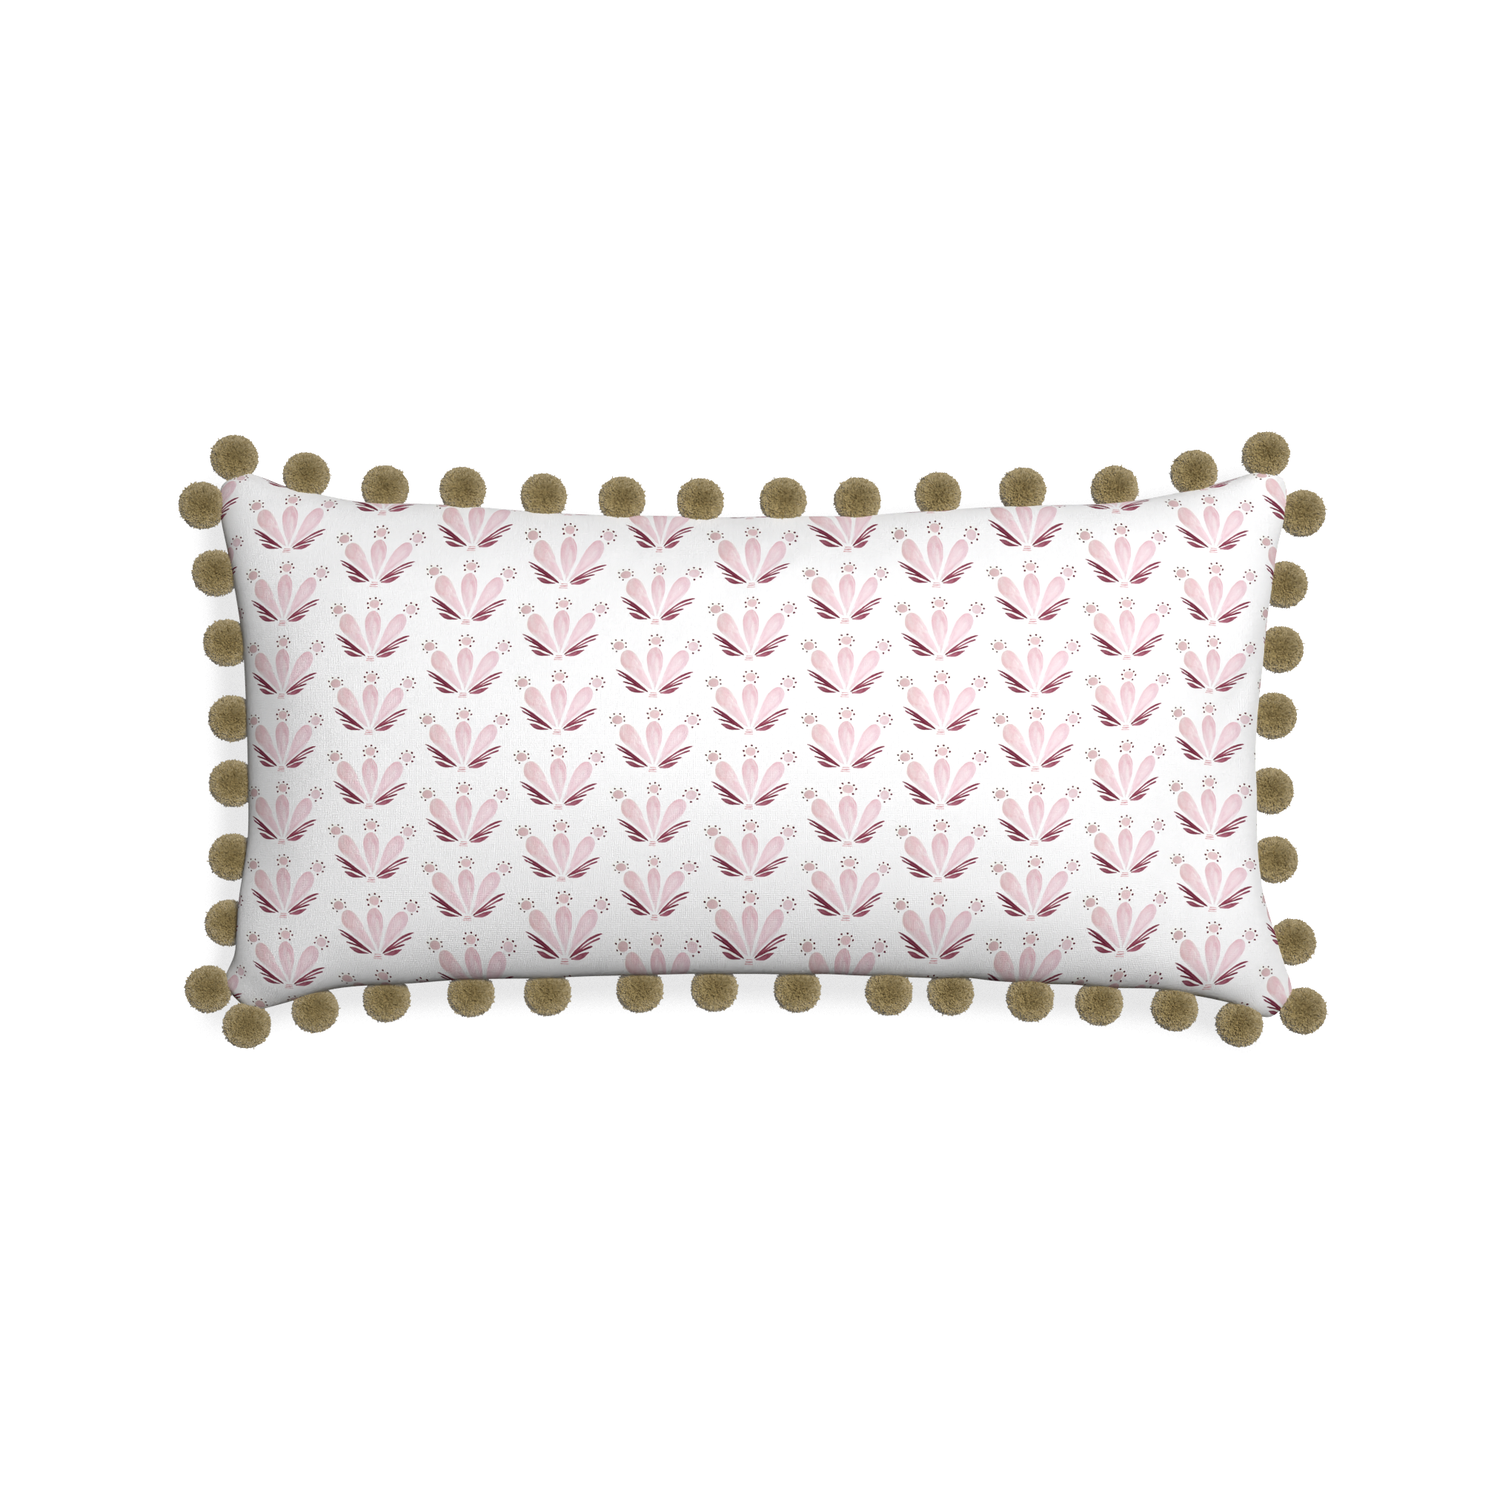 Midi-lumbar serena pink custom pink & burgundy drop repeat floralpillow with olive pom pom on white background